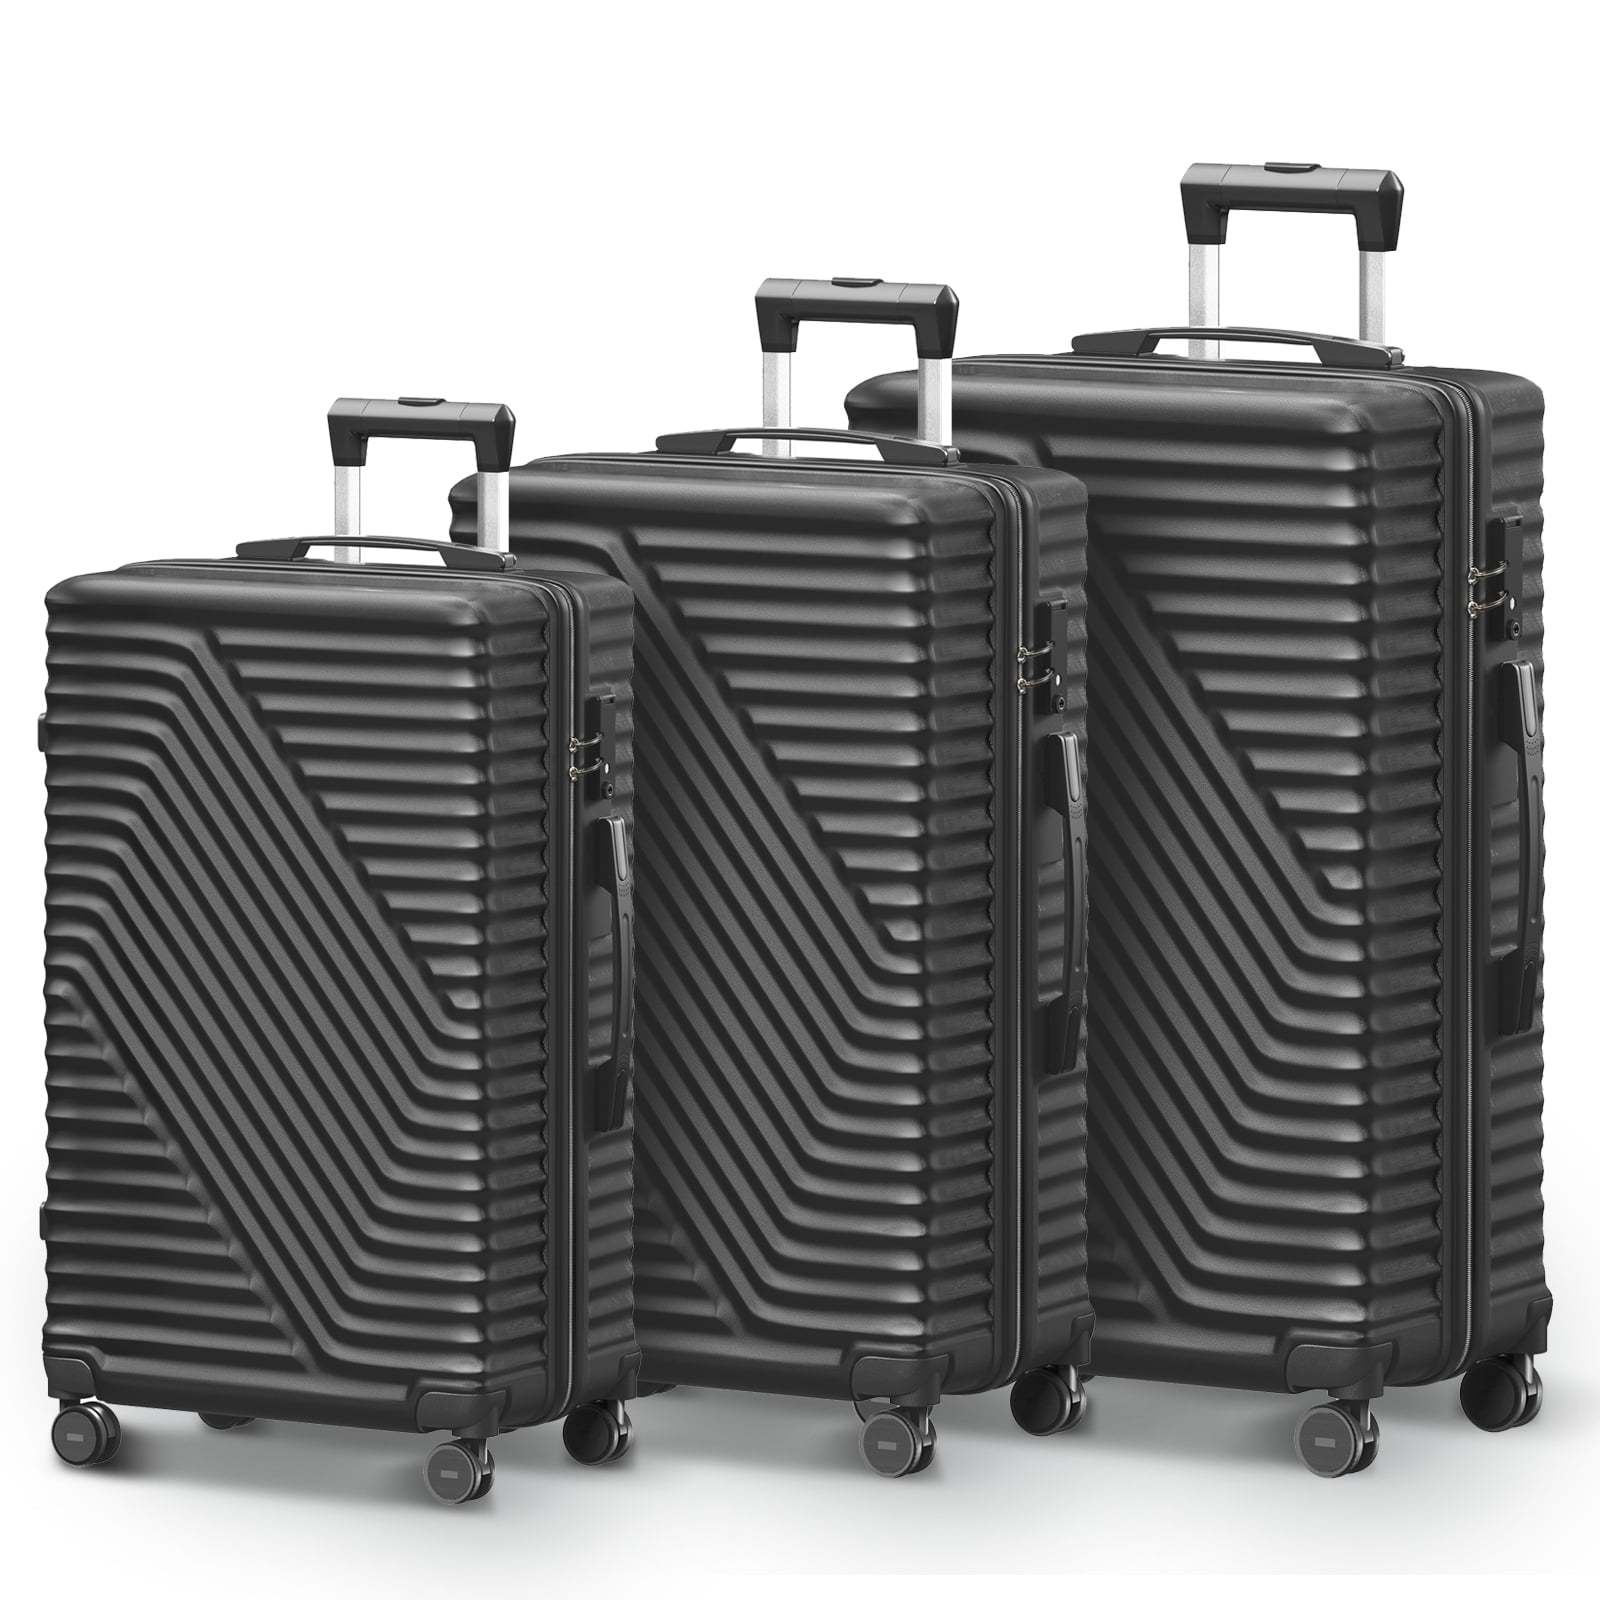 Hardshell Luggage Sets 3 Piece Double Spinner Wheels